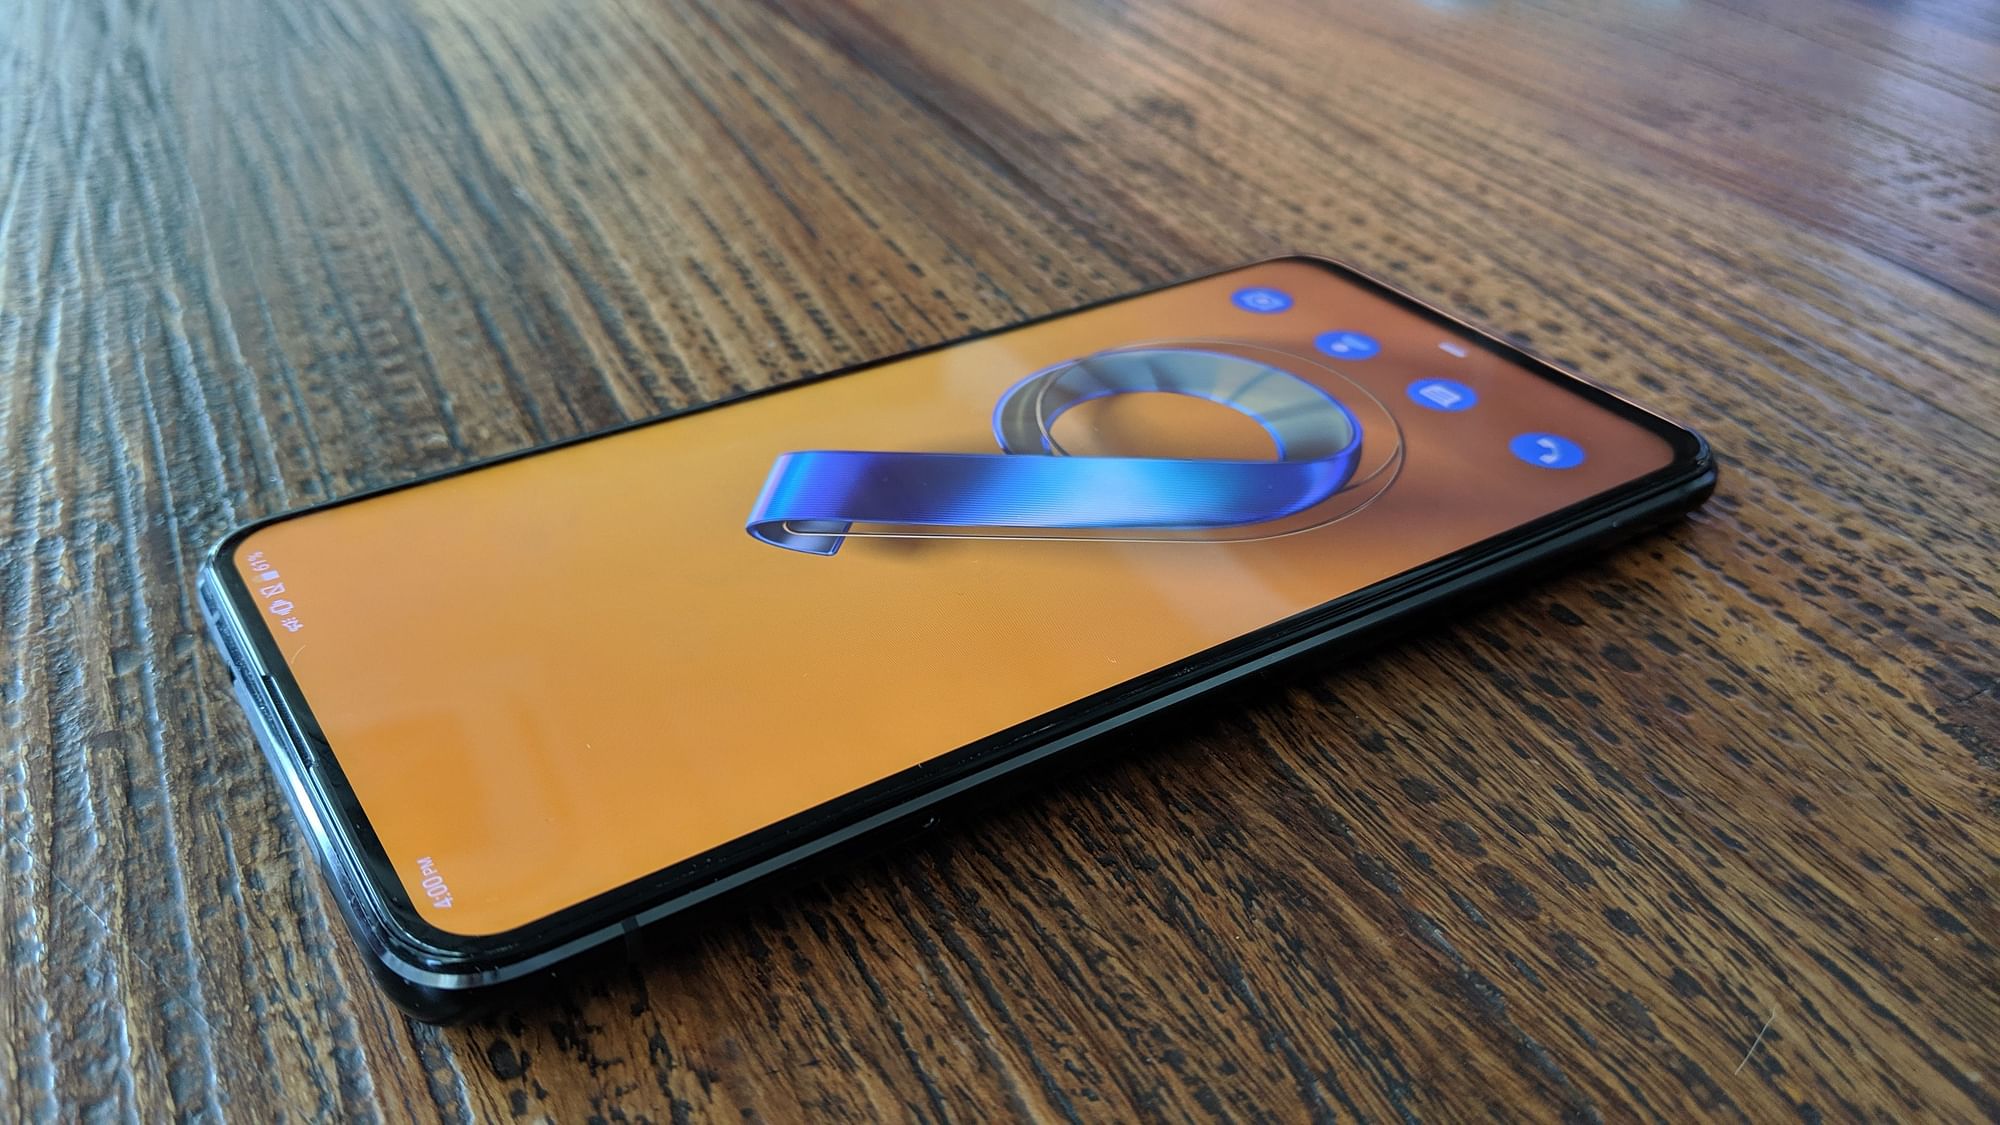 Asus Zenfone 6 is hoping to rival the OnePlus 7 in India.